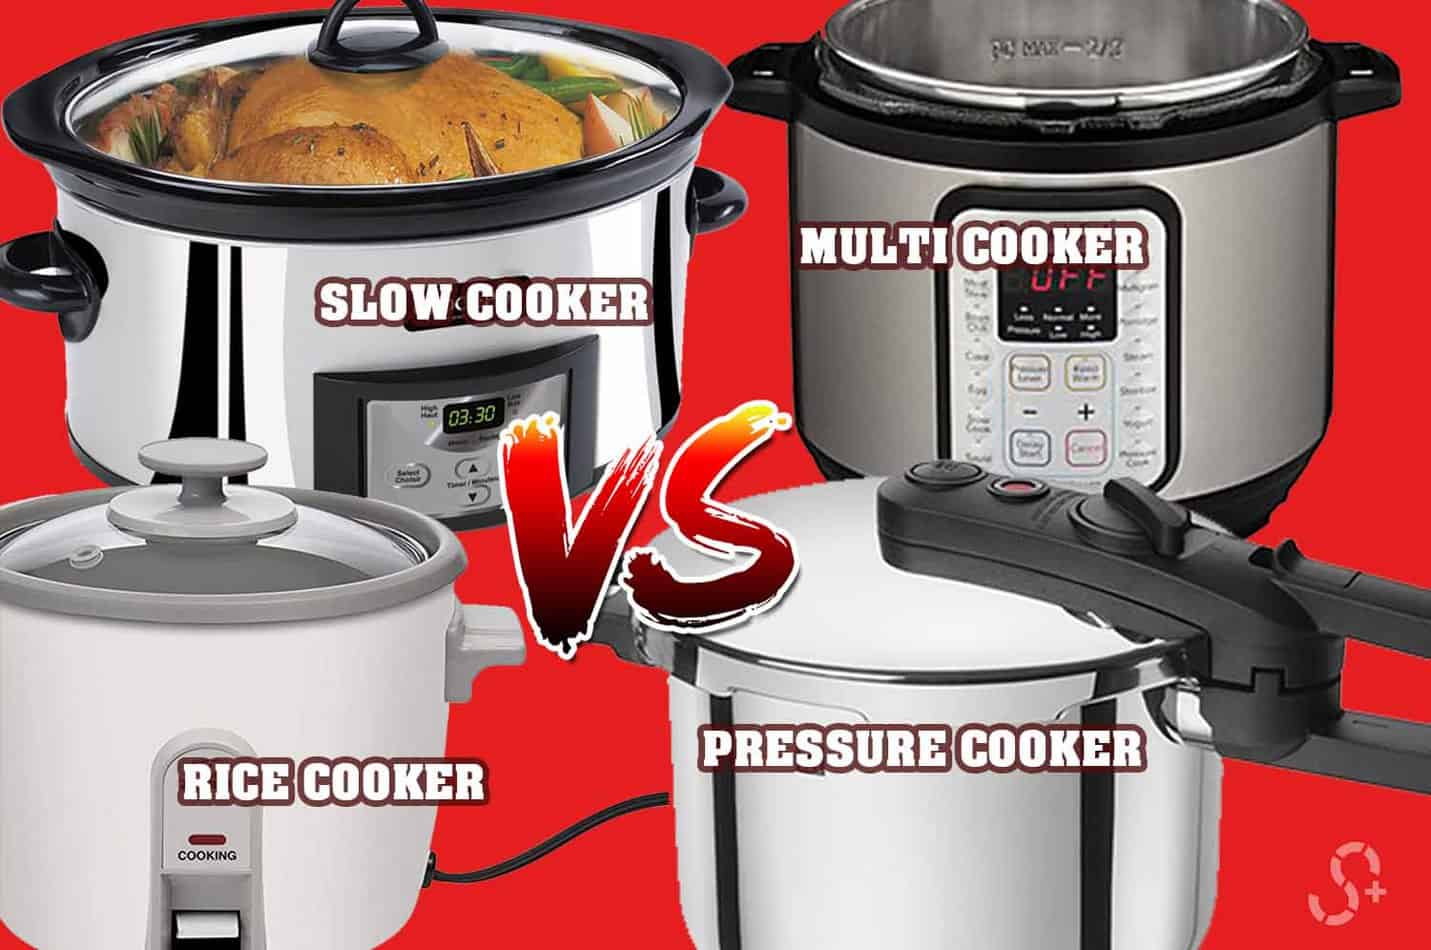 https://simplelifesaver.com/wp-content/uploads/2020/08/Differences-between-rice-cooker-pressure-cooker-multi-cooker-and-slow-cooker.jpg